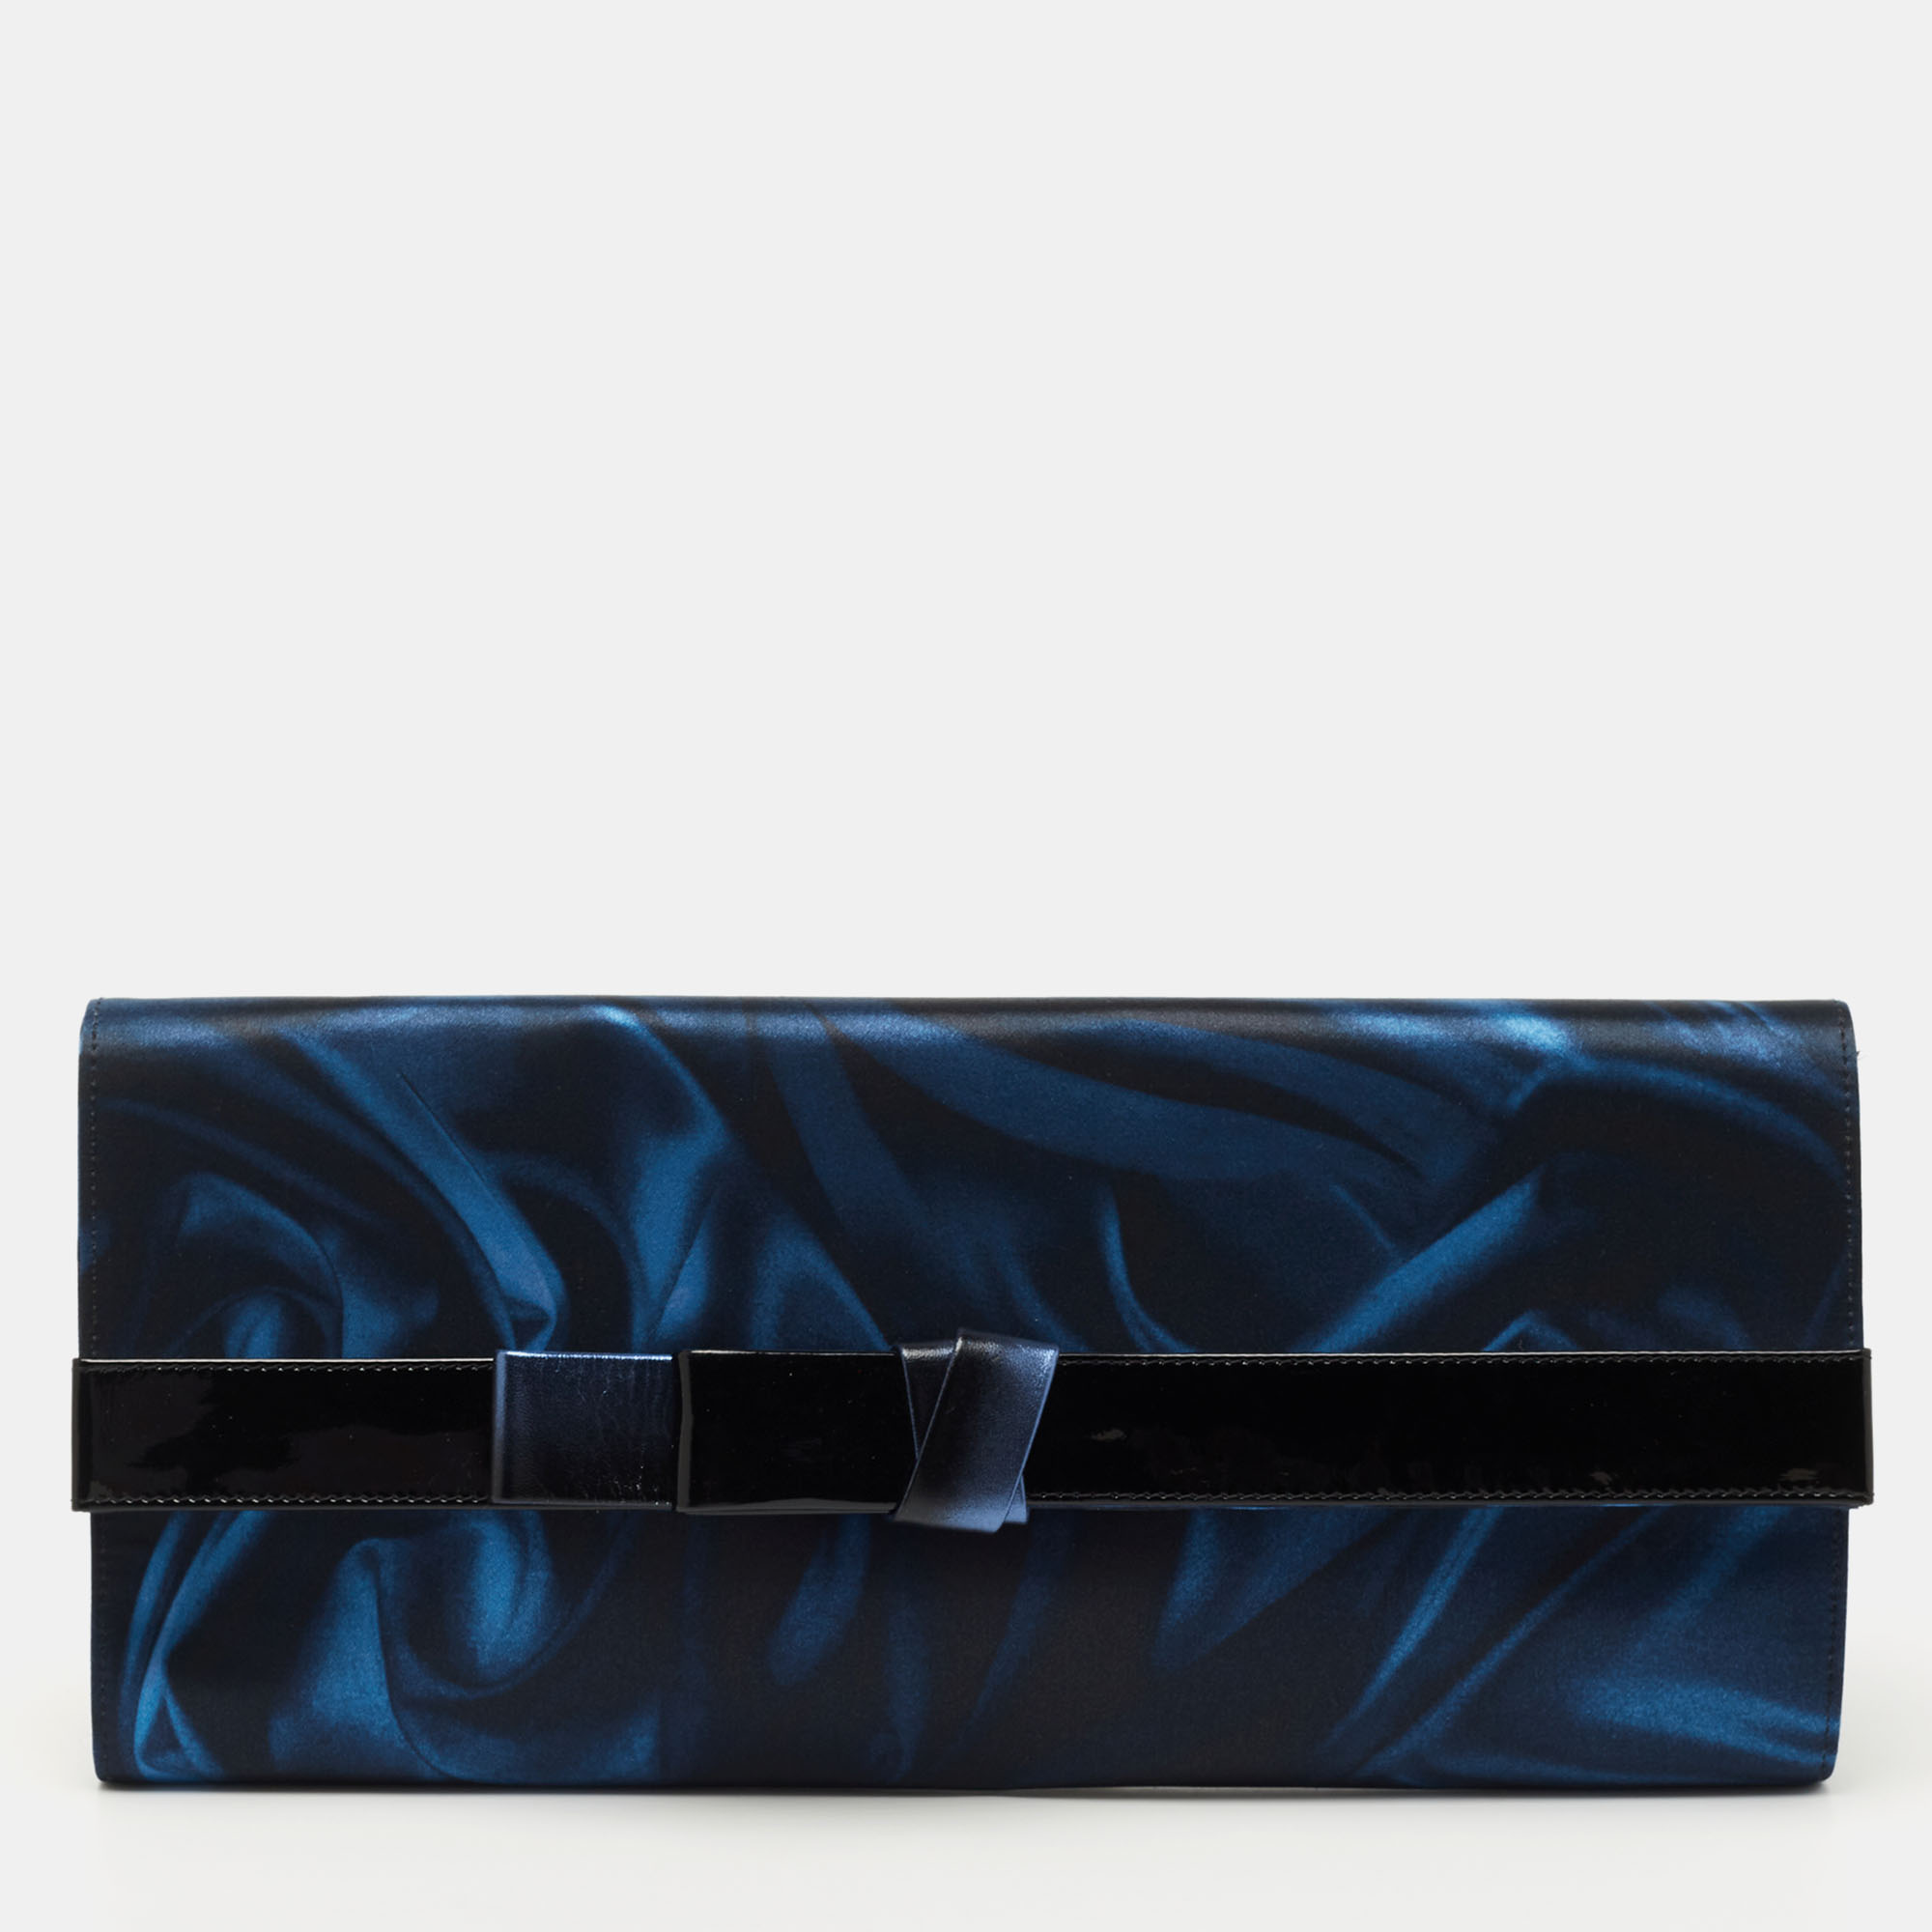 Pre-owned Giorgio Armani Navy Blue/black Nylon And Patent Leather Oversized Bow Clutch